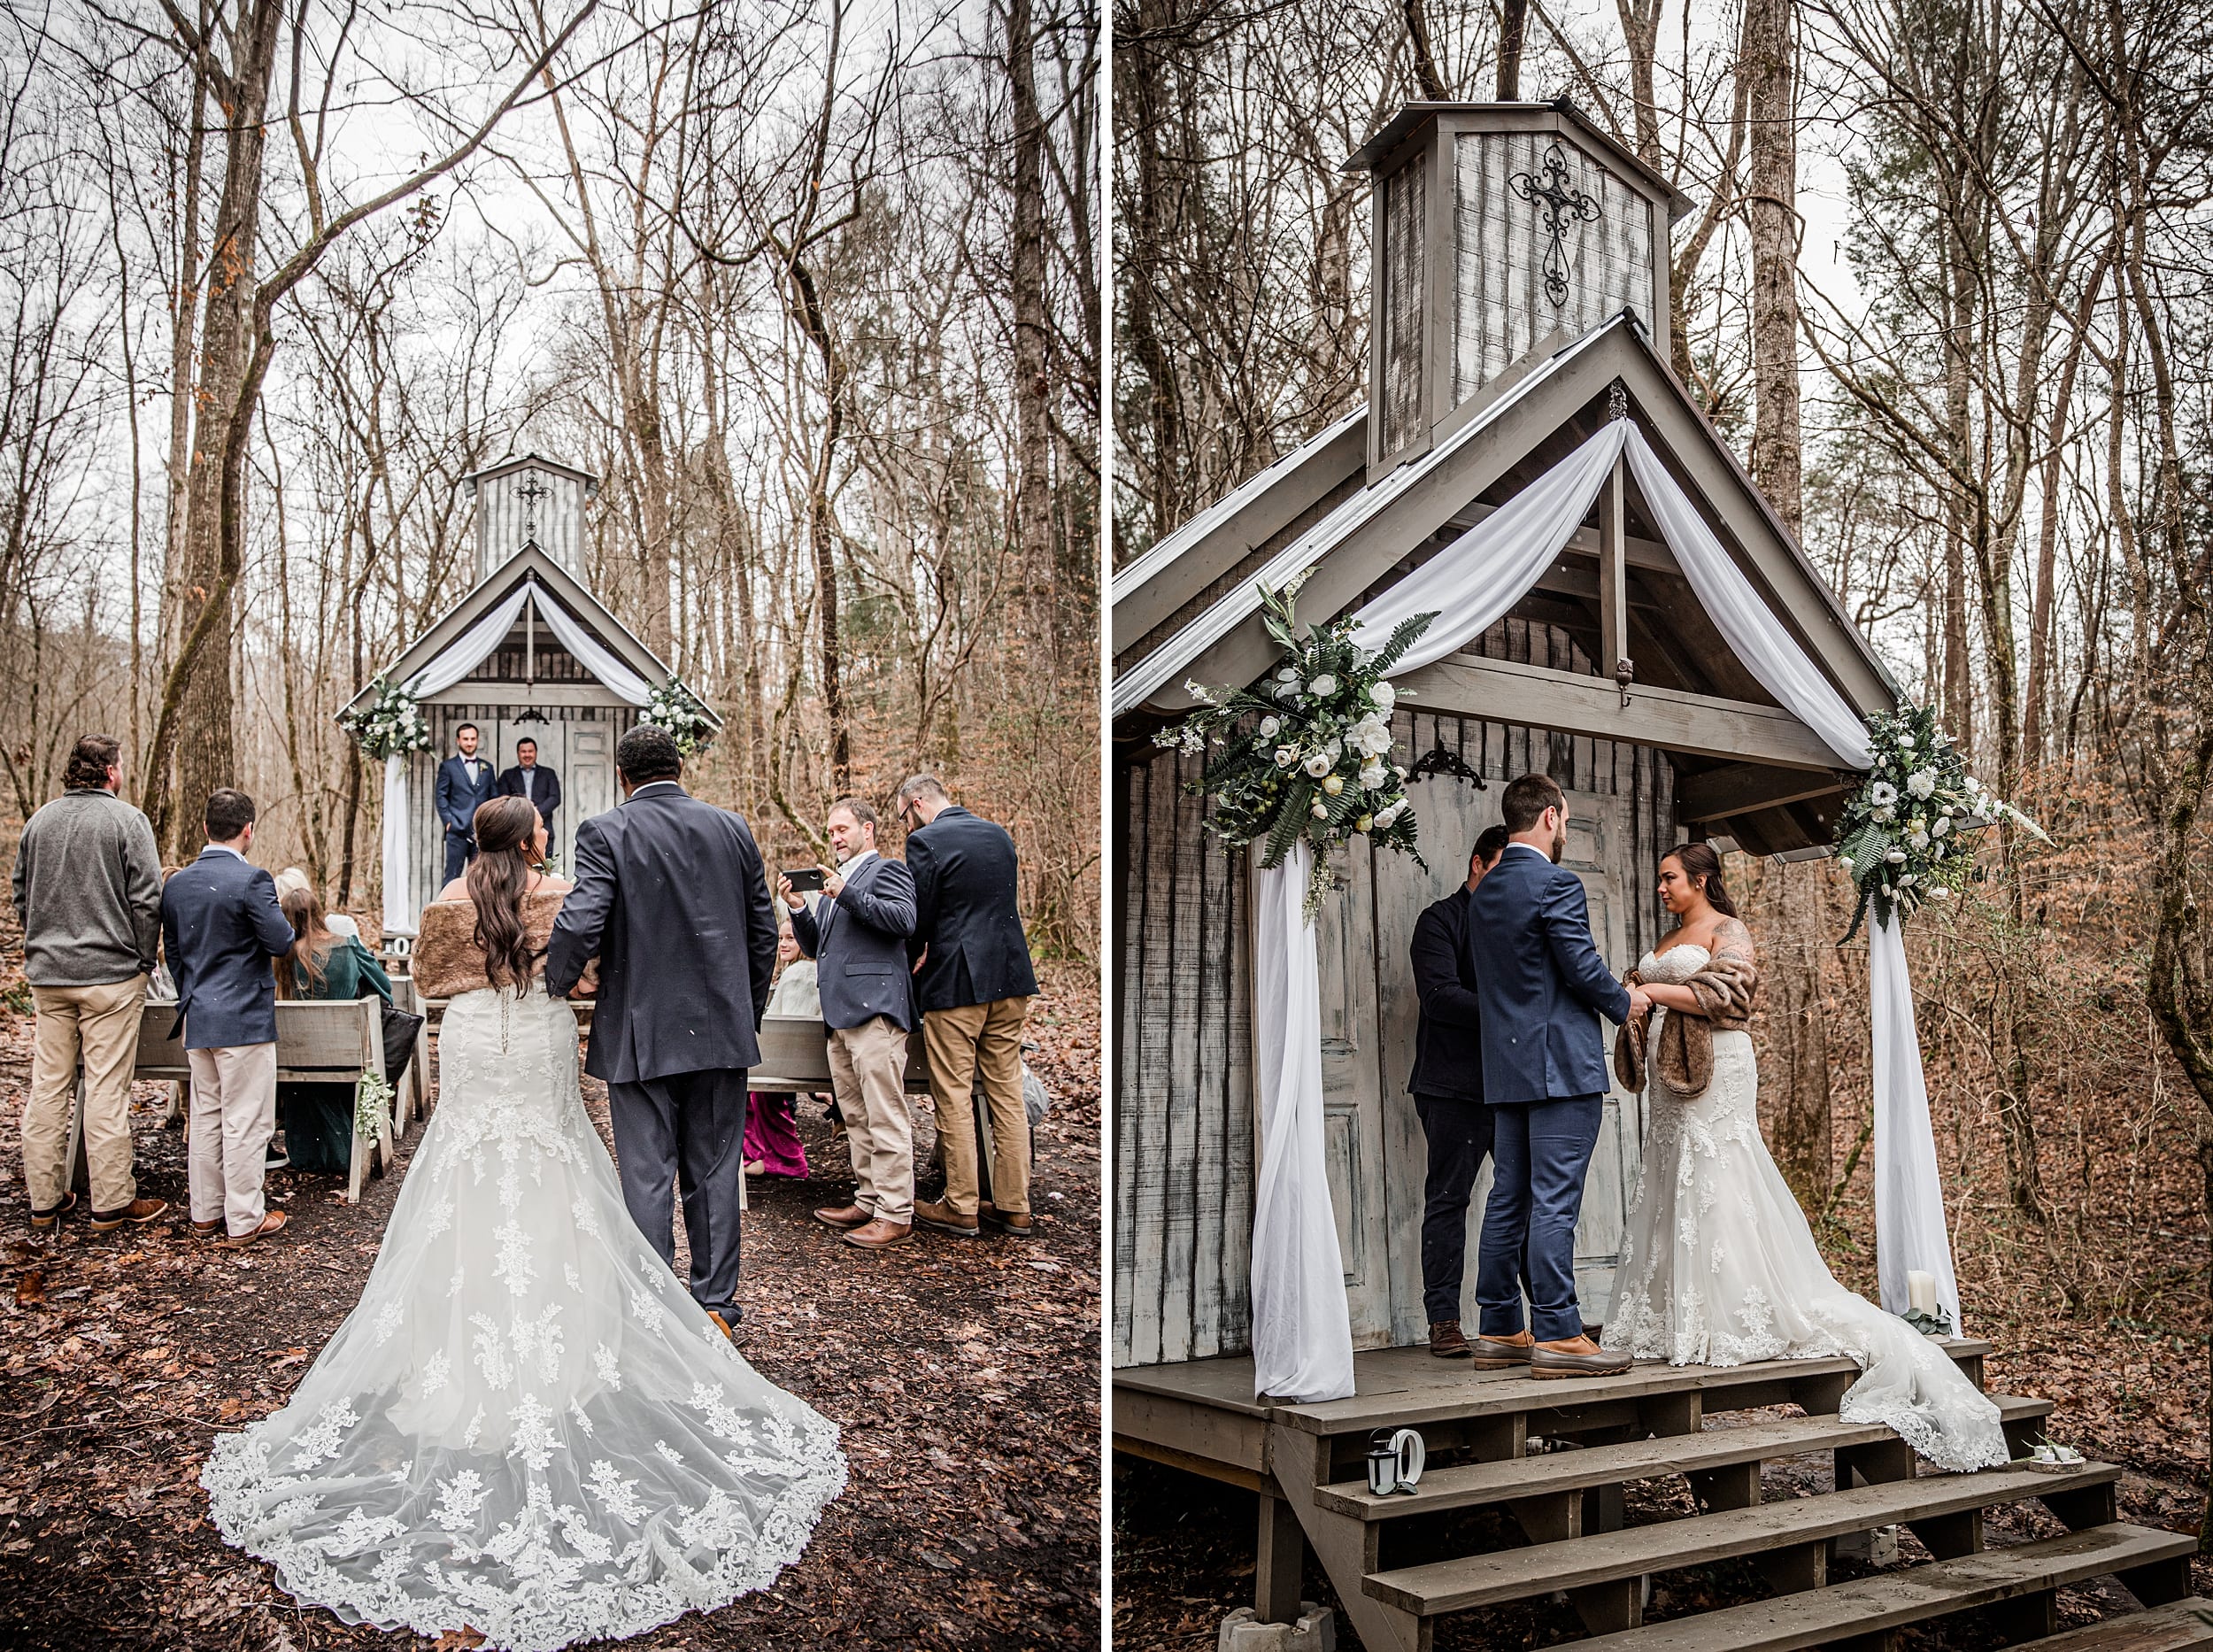 Eloping in the Smoky Mountains